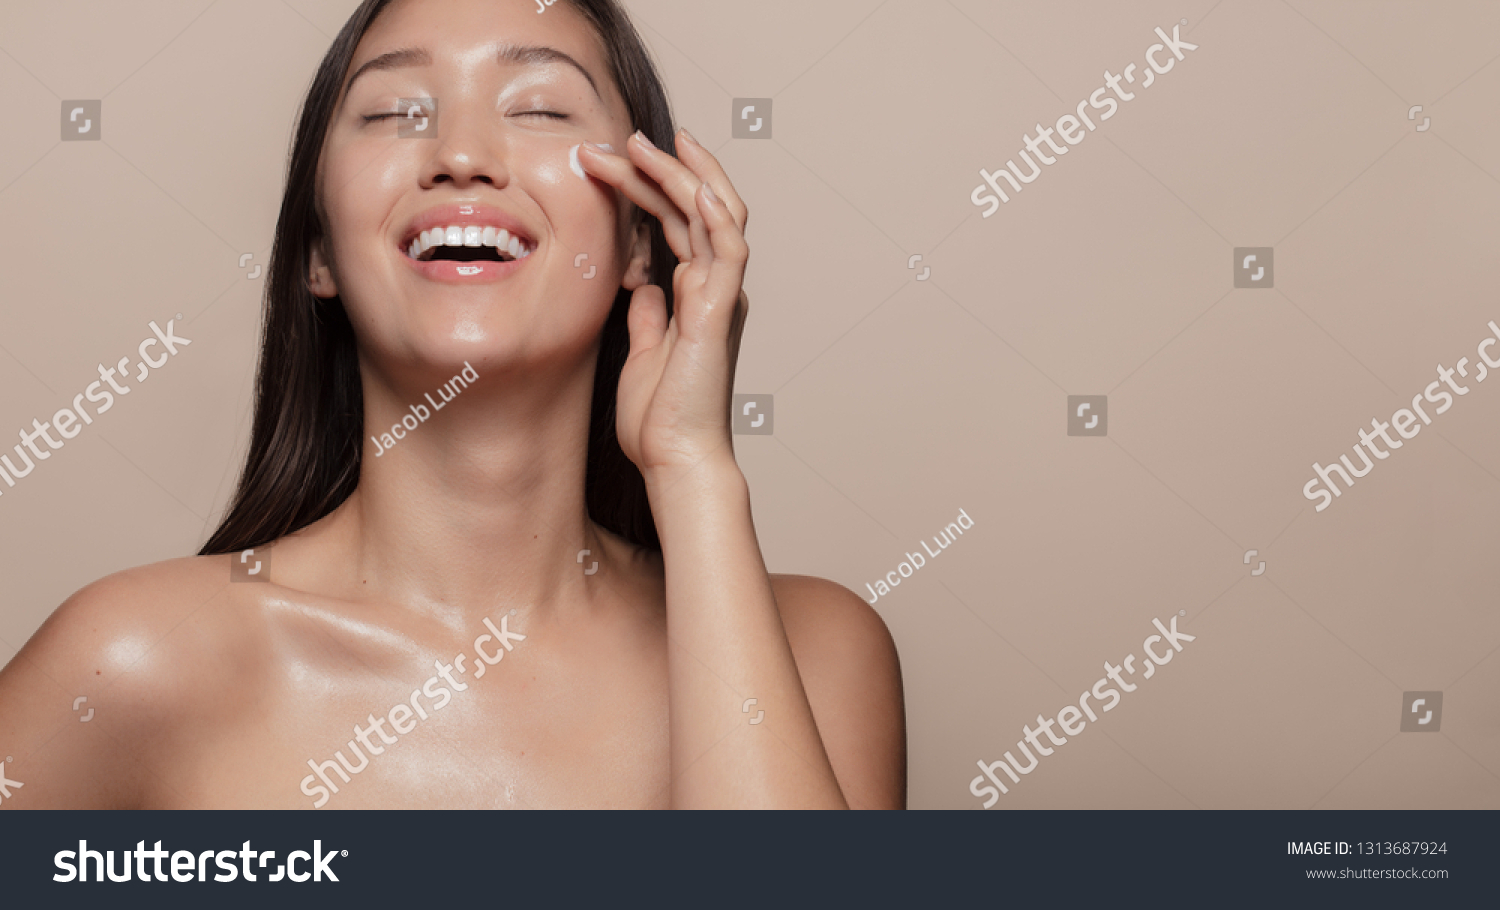 Beautiful girl with bare shoulders applying cream on her face and smiling against beige background. Smiling asian woman with glowing skin applying facial skincare cream with eyes closed. #1313687924